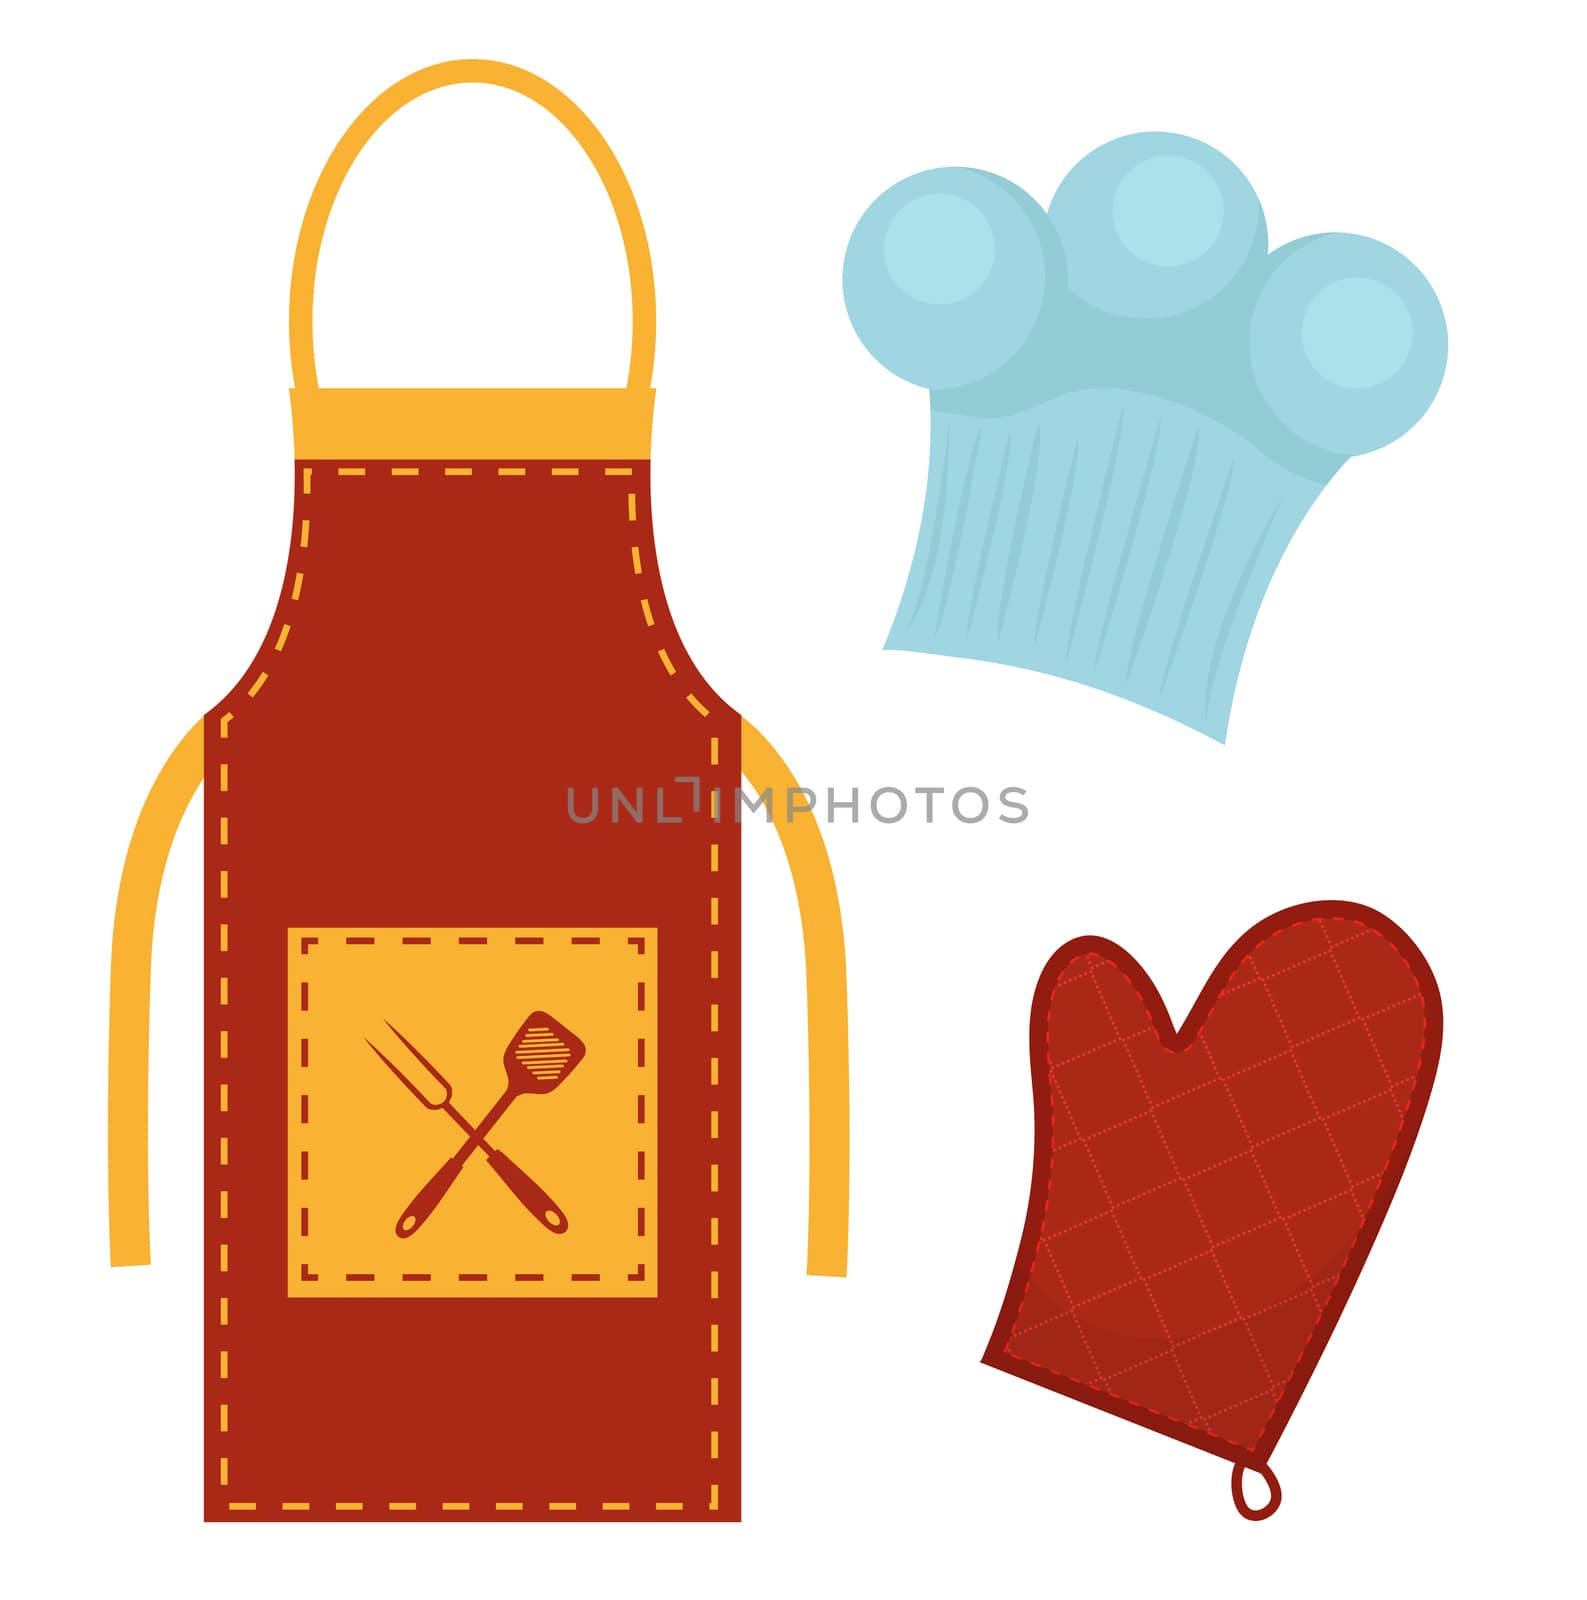 Kitchen set with apron, cook cap, potholder. Clothes for cooking, restaurant concept. Chef's uniform. Isolated on white background. illustration